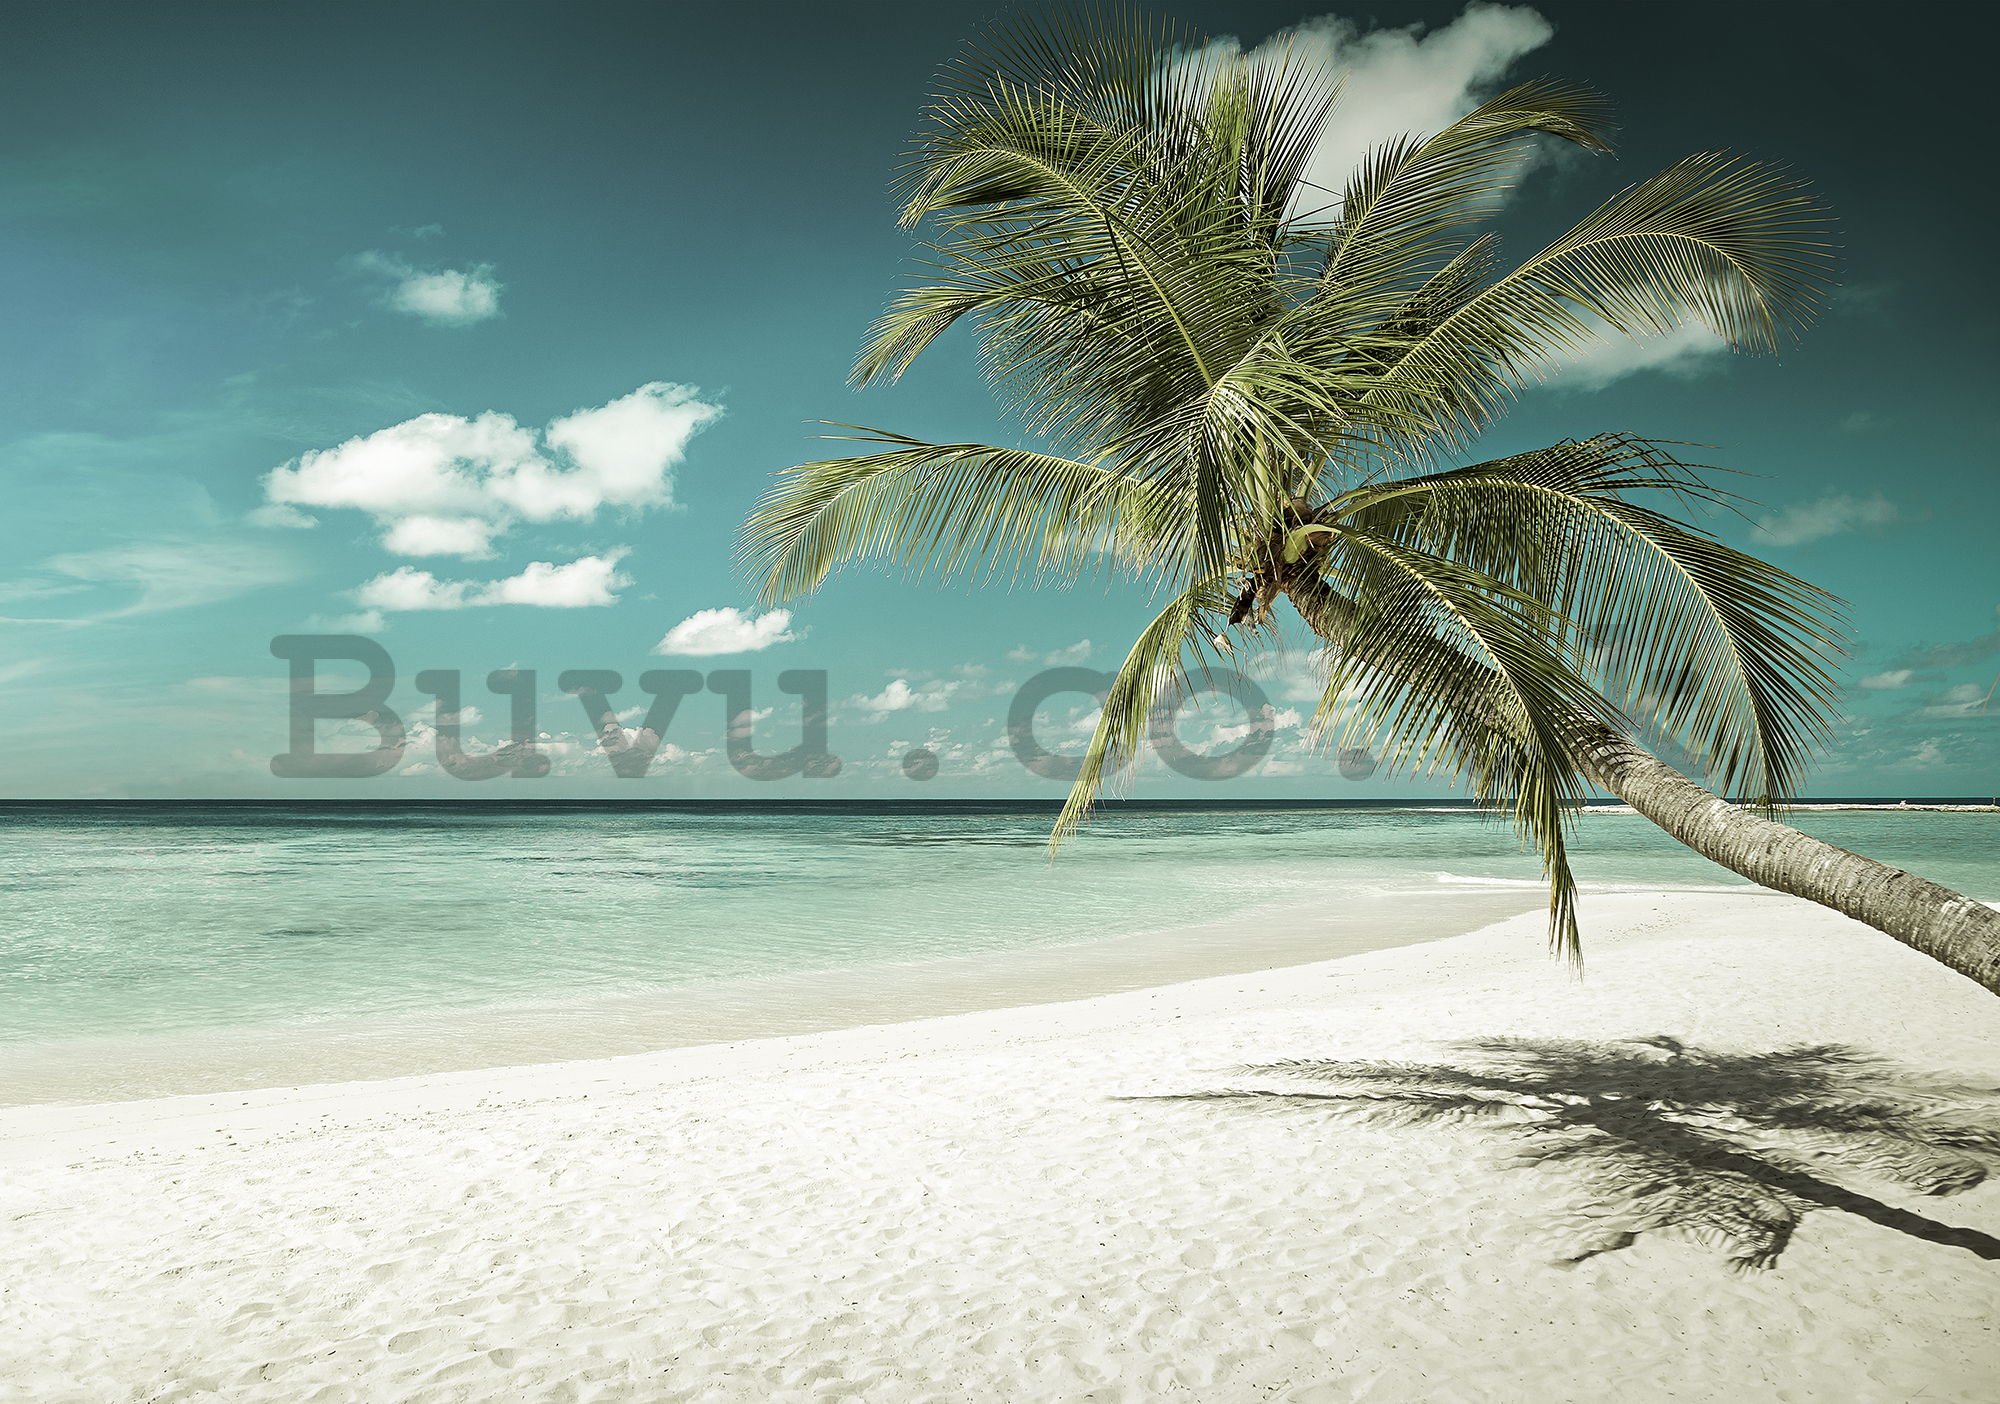 Wall mural: Palm tree over the sea - 184x254 cm